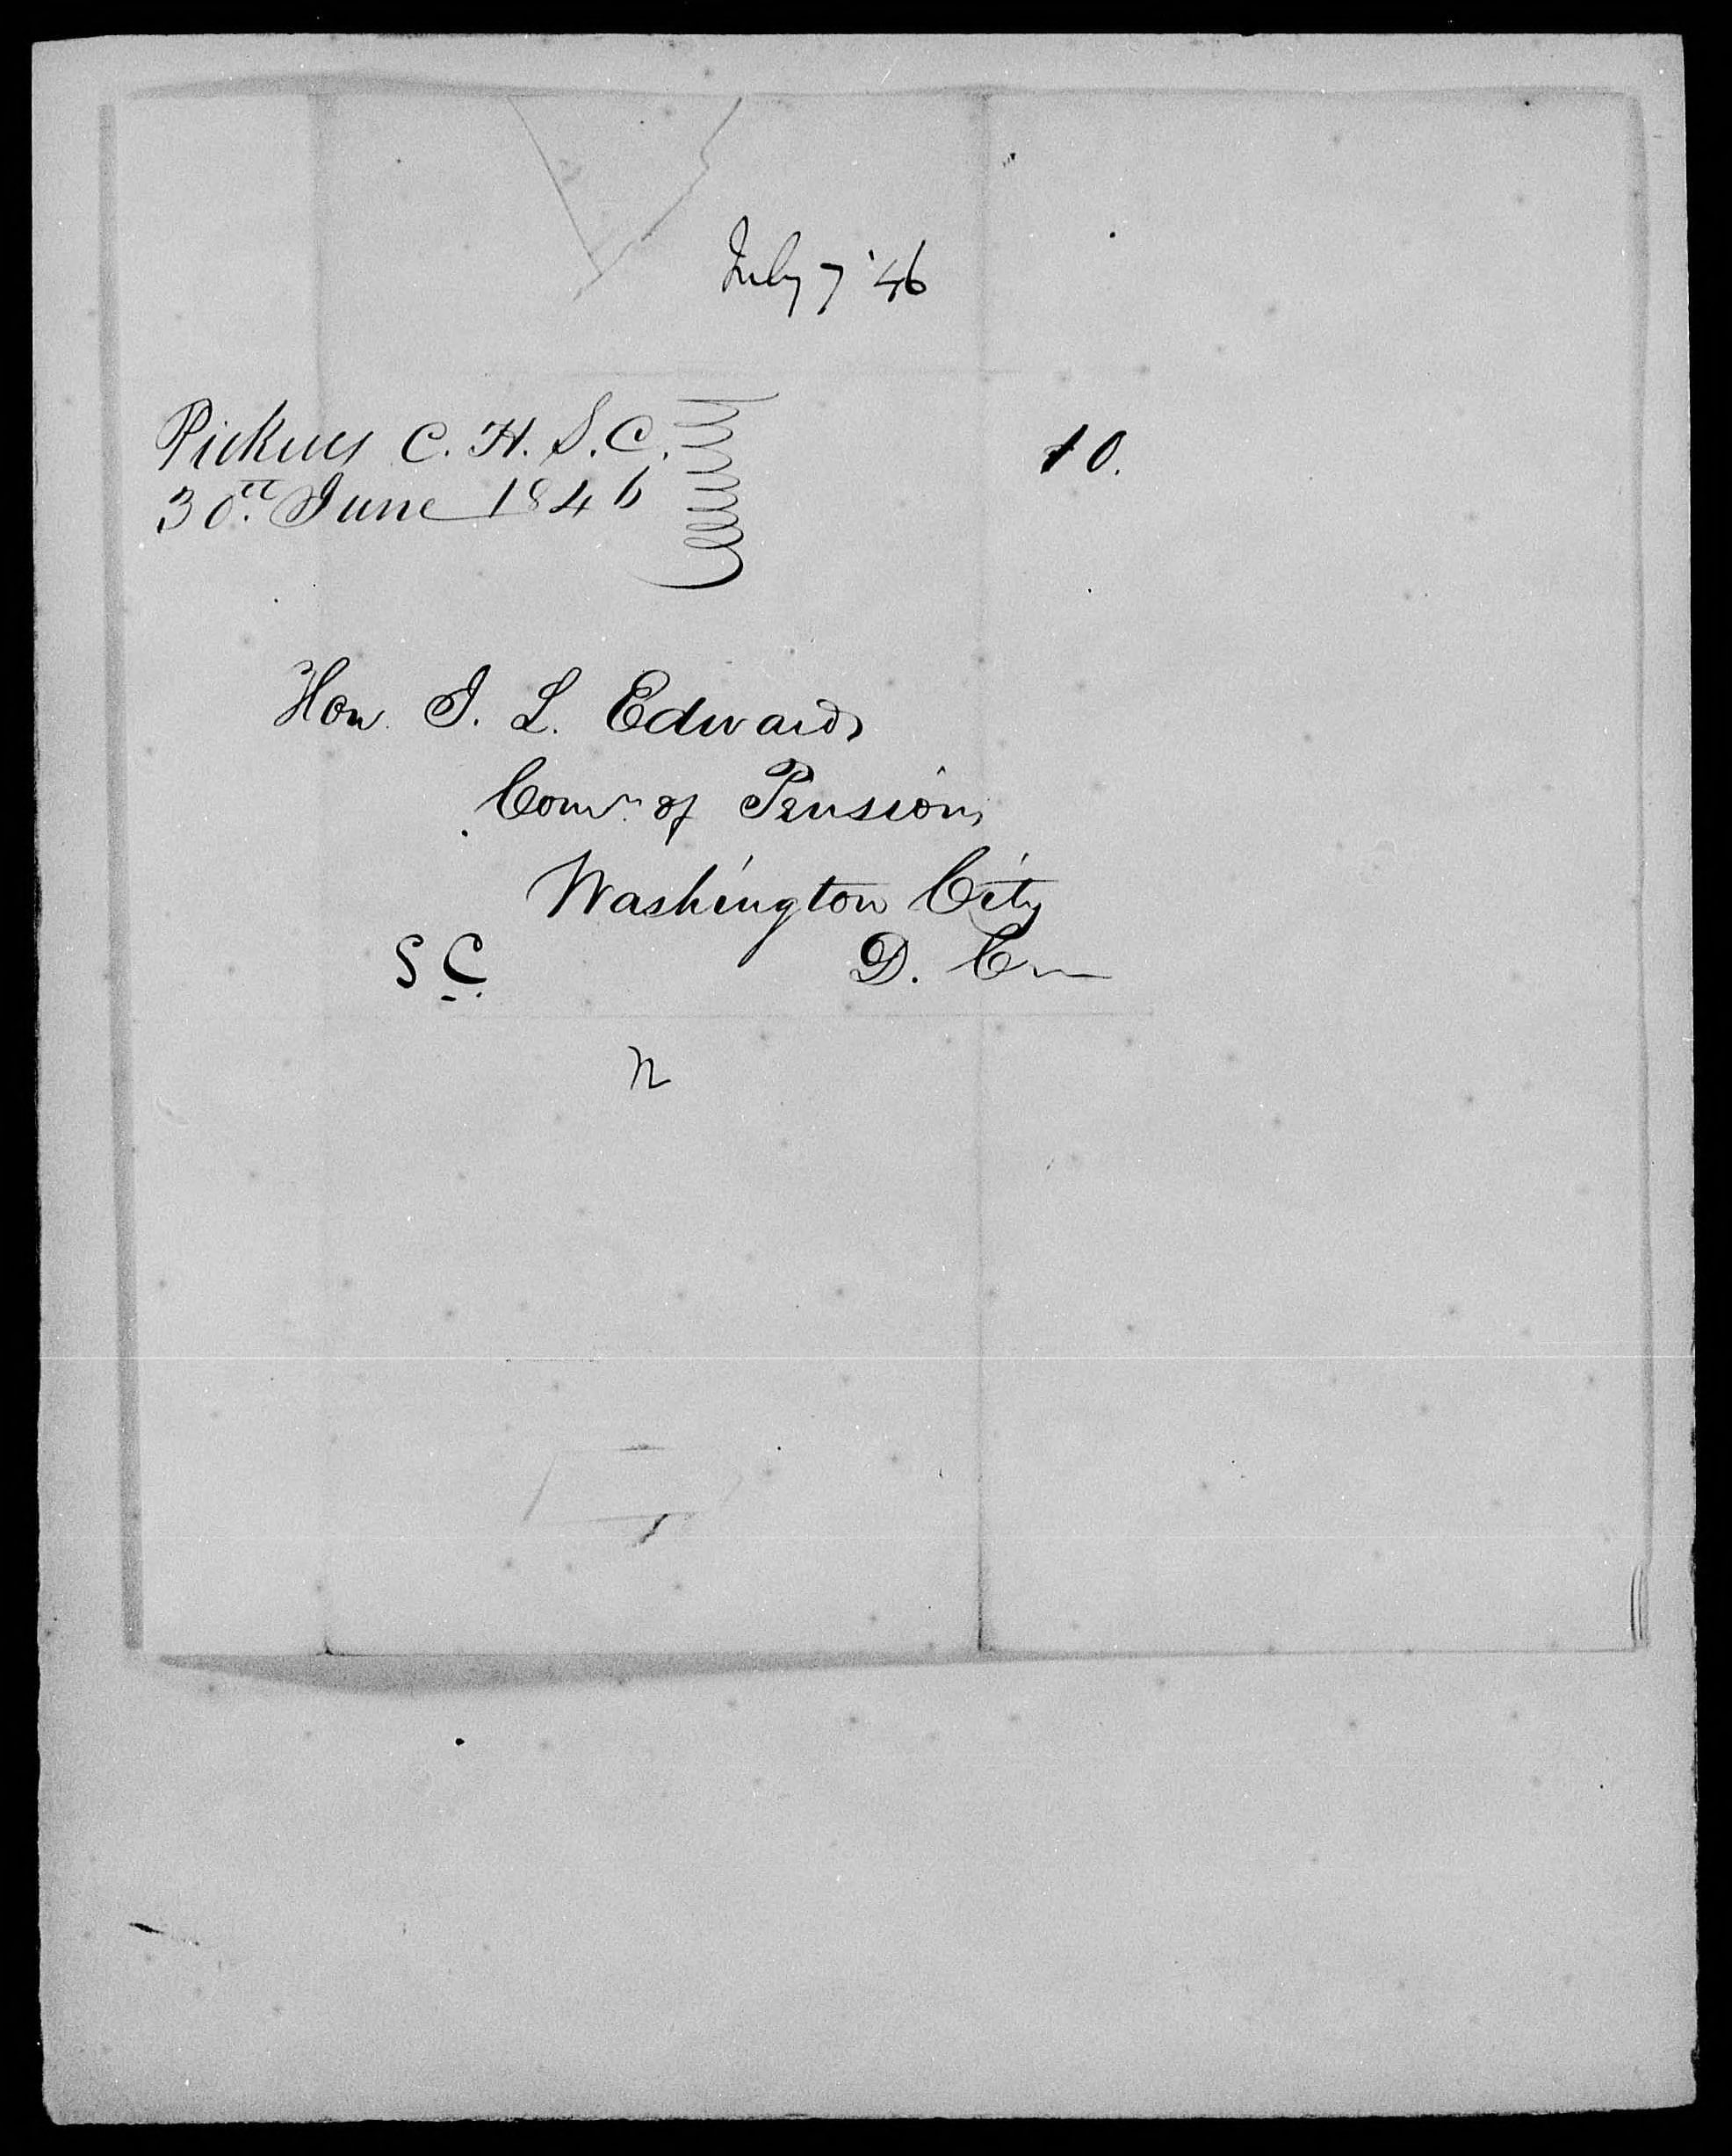 Letter from Miles M. Norton to James L. Edwards, 29 June 1846, page 2